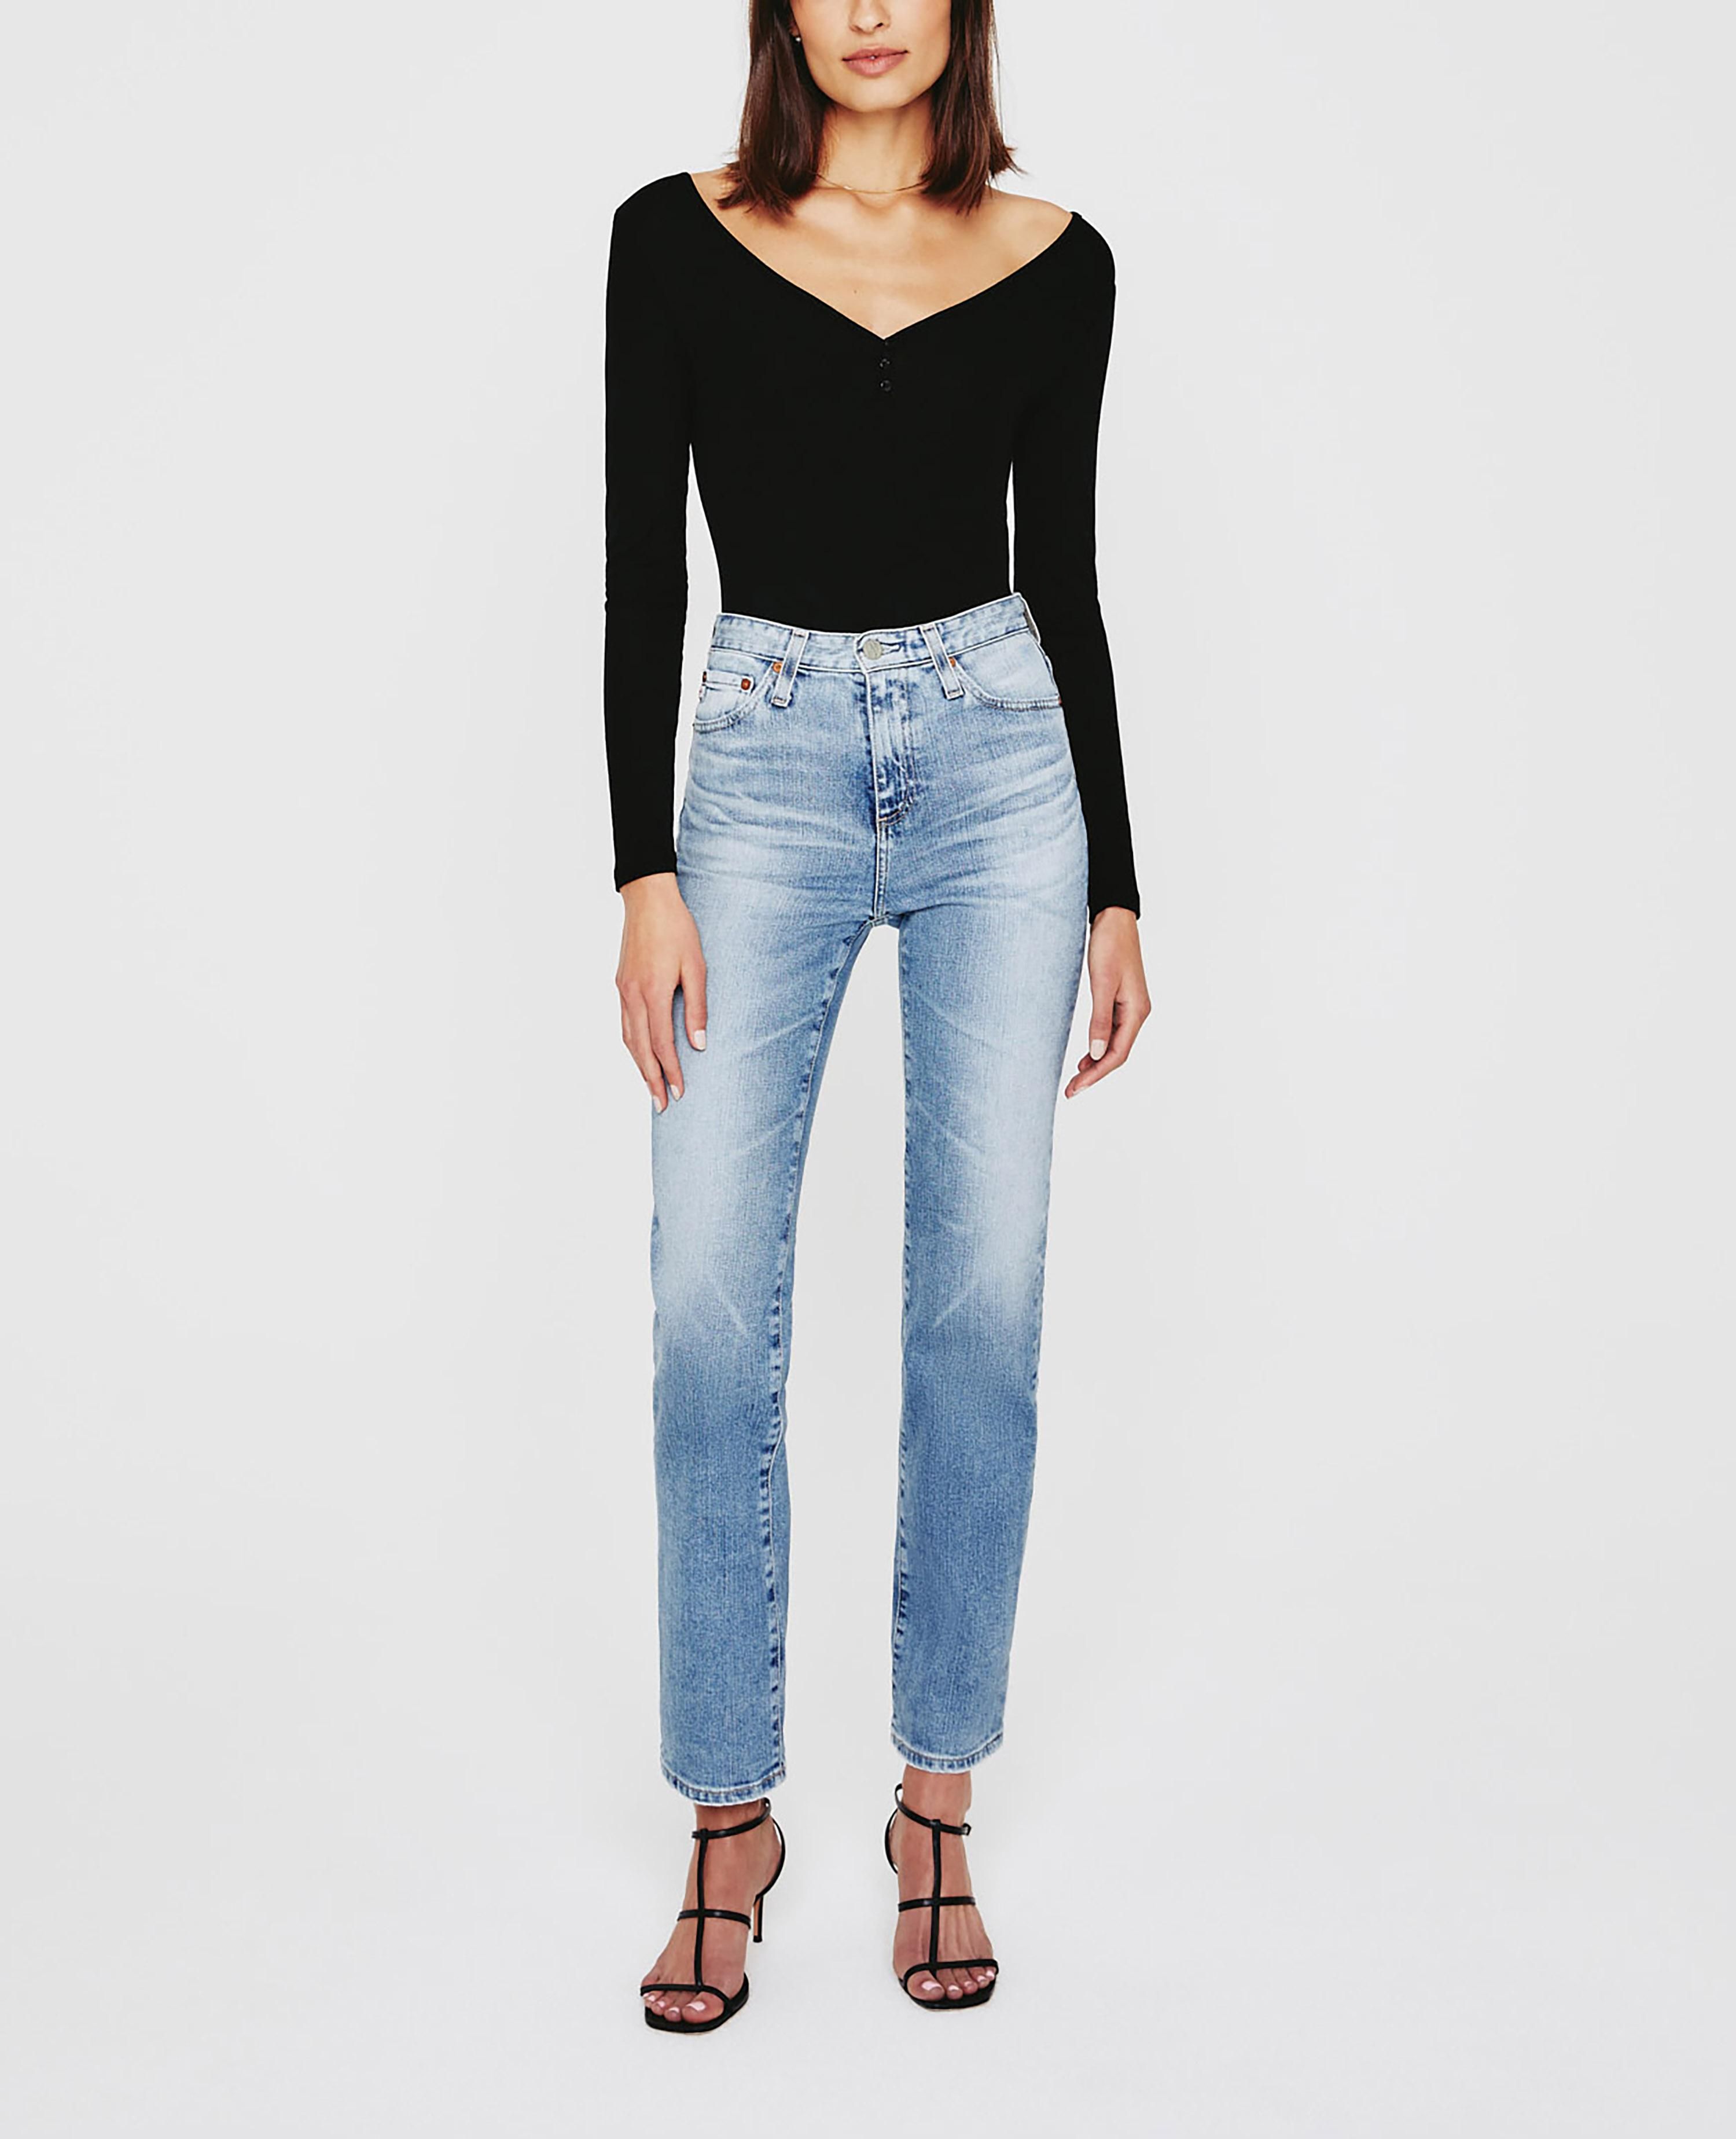 Alexxis | AG Jeans Outlet